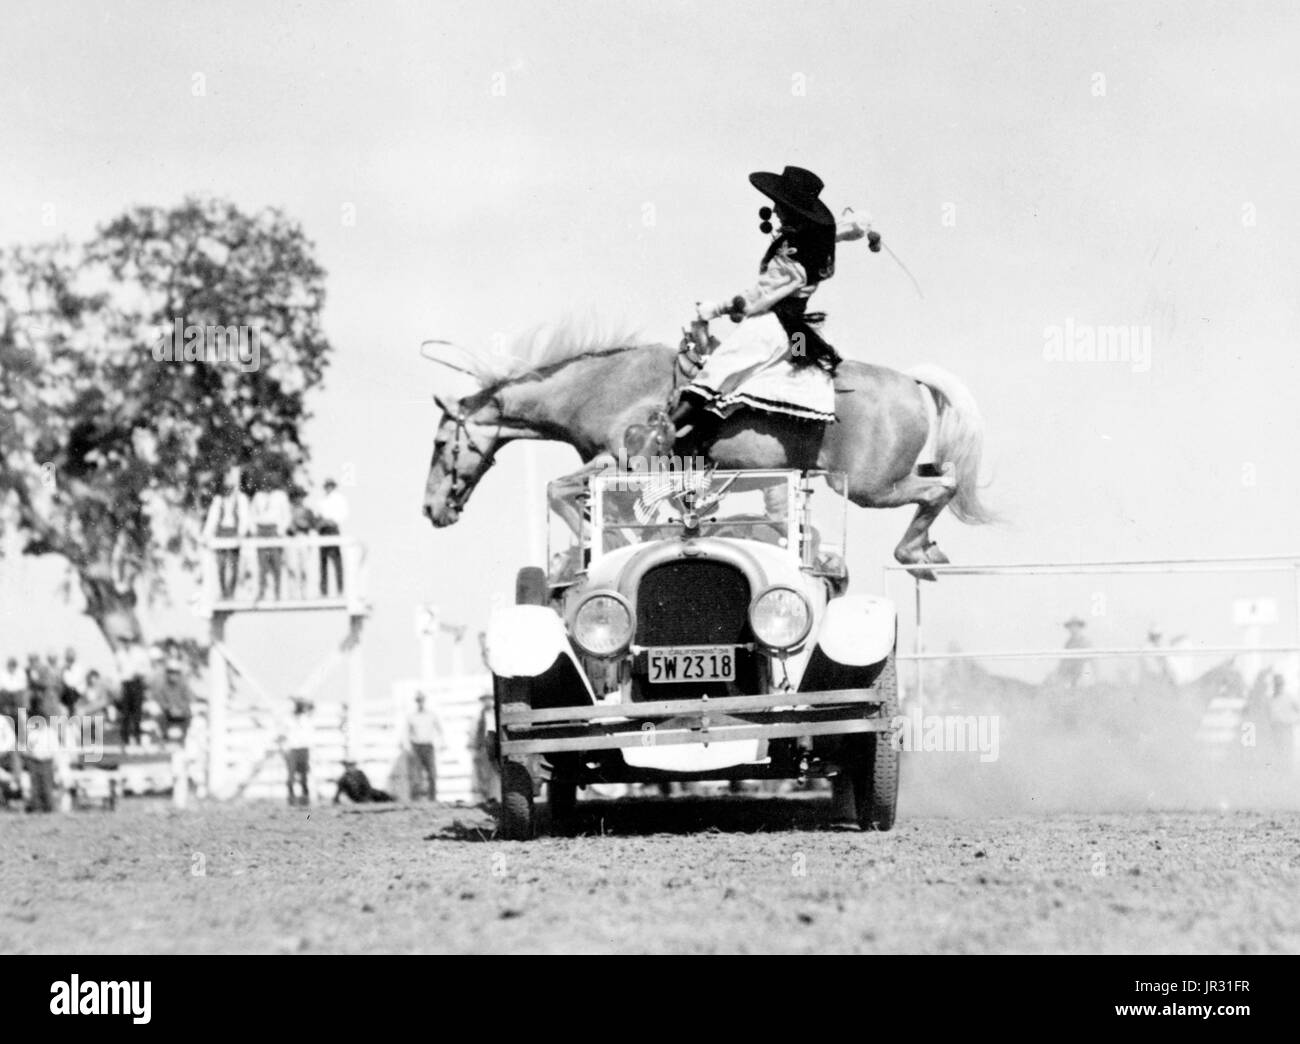 Cowgirl on horseback appearing to leap over a convertible automobile driven by a man at a rodeo. Historically, women have long participated in rodeo. "Prairie Rose" Henderson debuted at the Cheyenne rodeo in 1901, and, by 1920, women were competing in rough stock events, relay races and trick riding. But after Bonnie McCarrol died in the Pendleton Round-Up in 1929 and Marie Gibson died in a horse wreck in 1933, women's competitive participation was curbed. Rodeo women organized into various associations and staged their own rodeos. Today, women's barrel racing is included as a competitive even Stock Photo